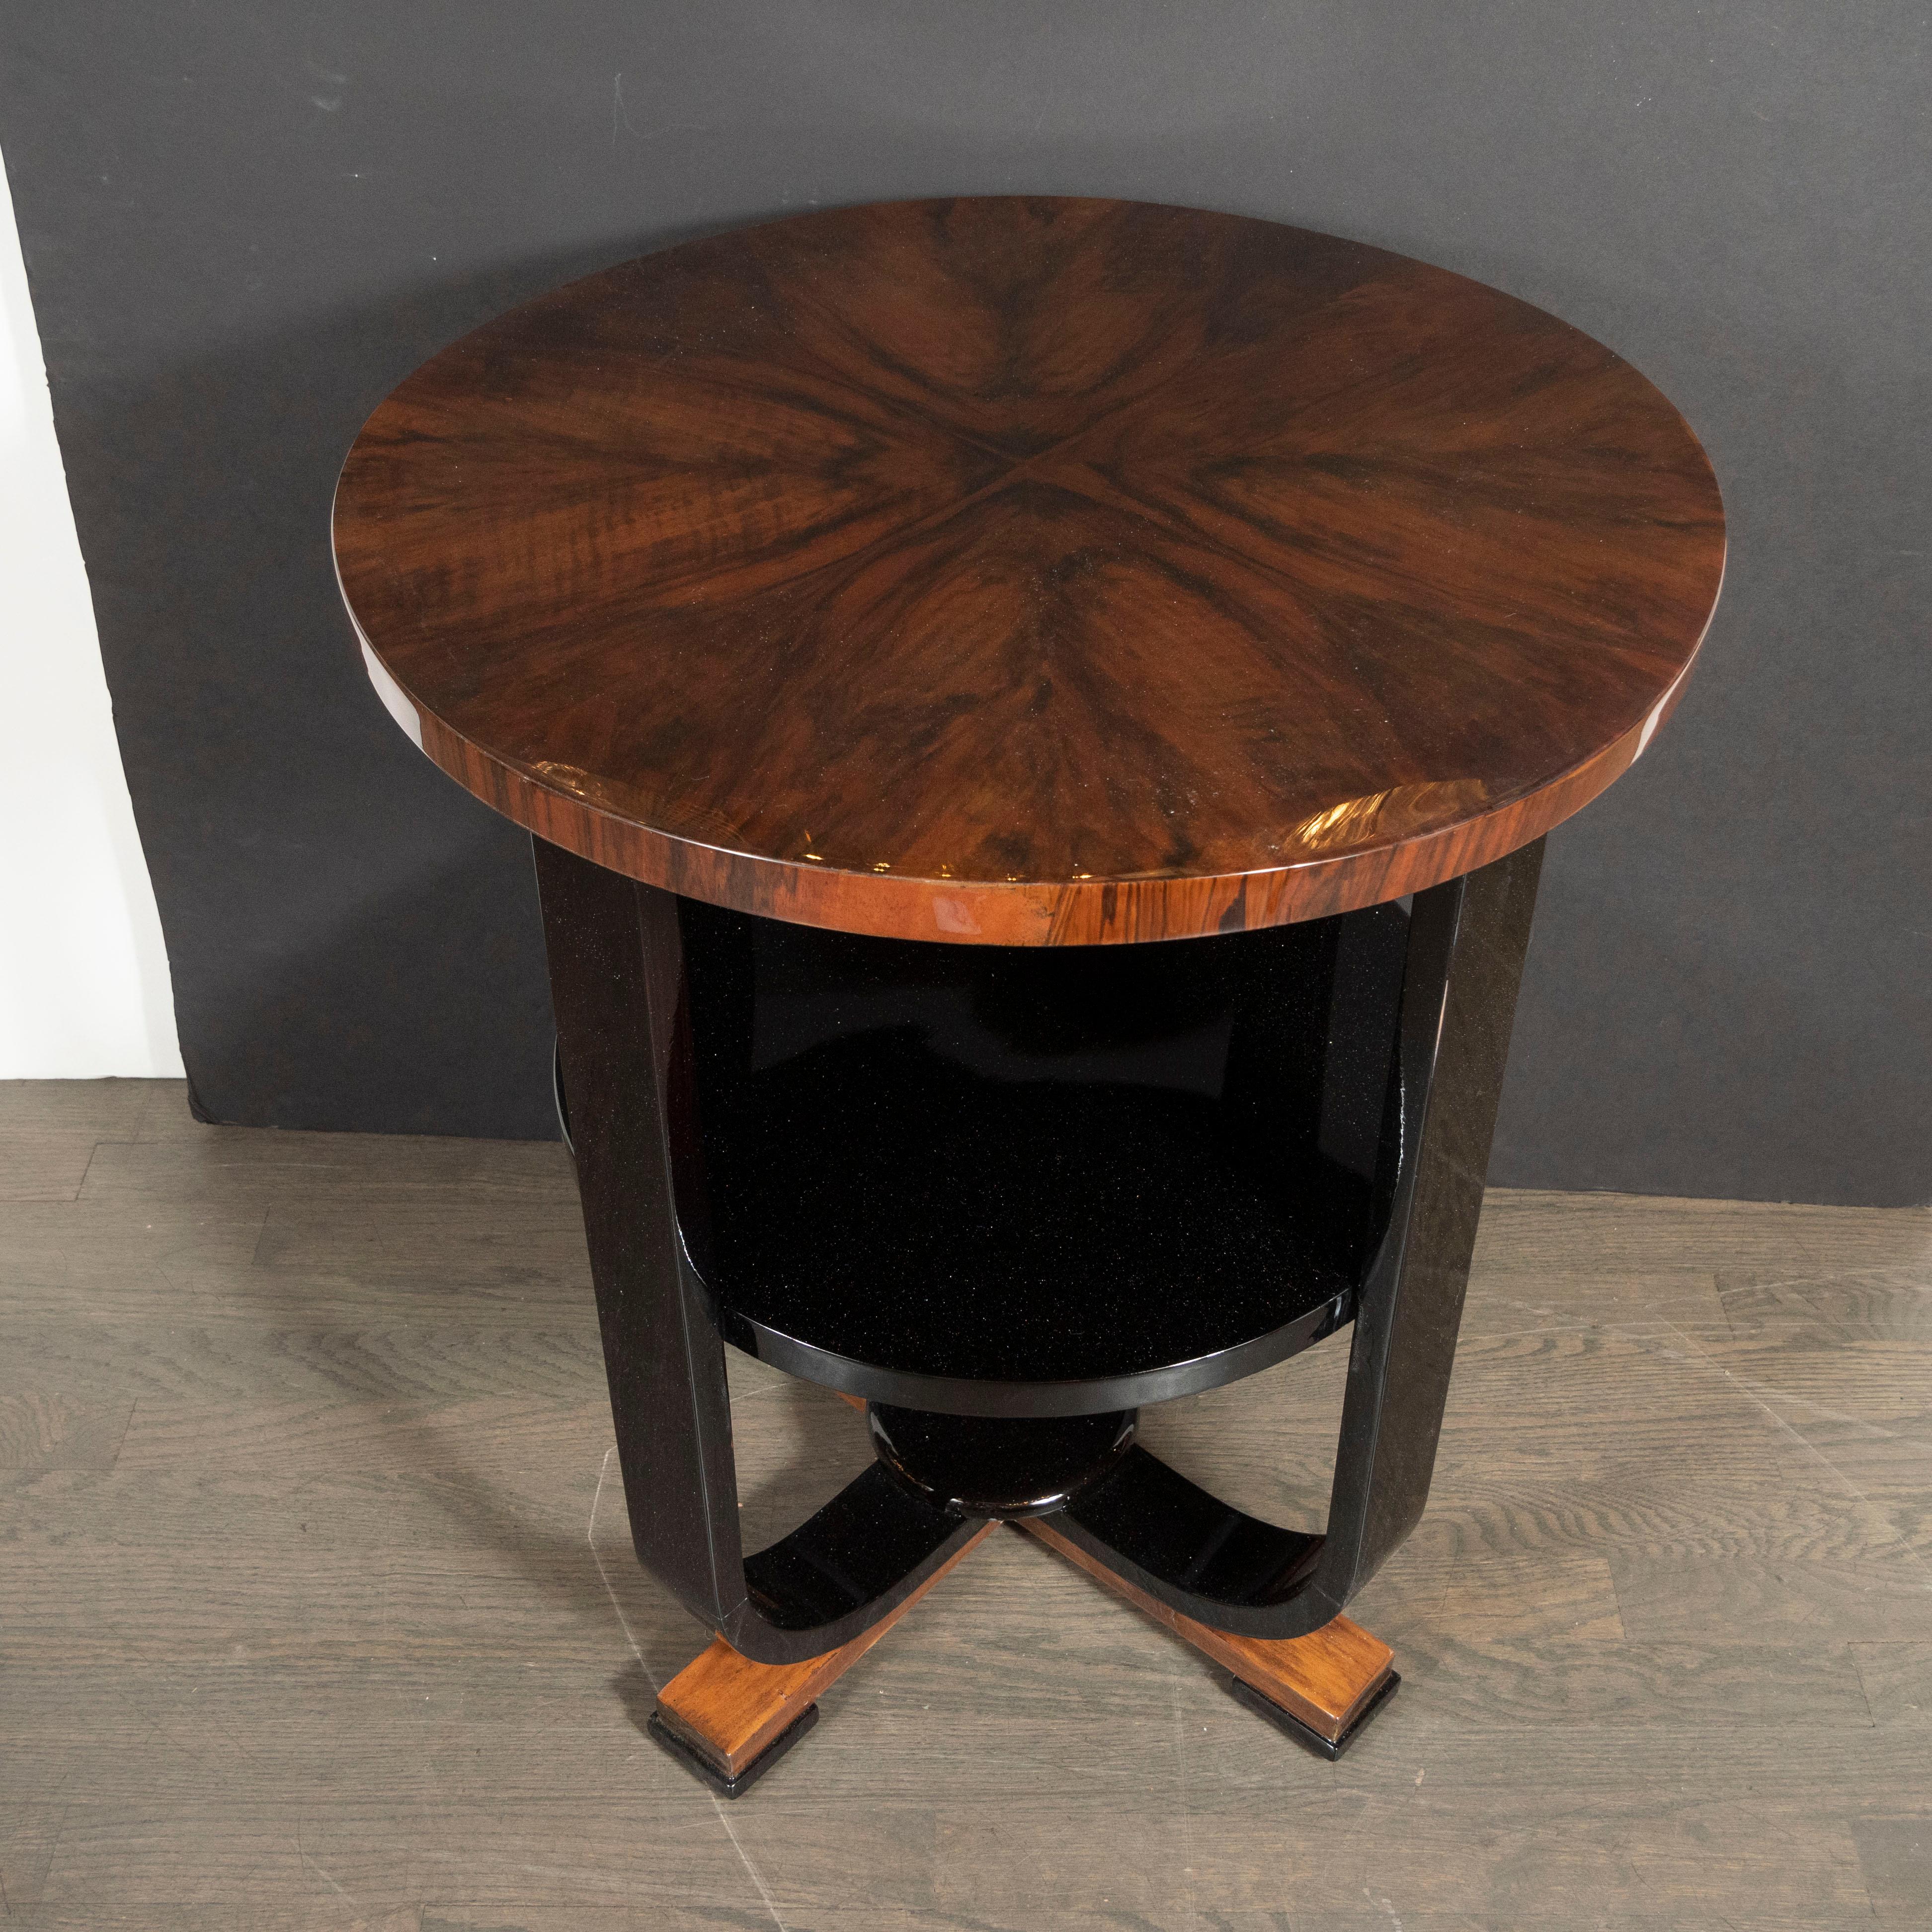 This stunning side/ gueridon table was realized in the United States, circa 1930. It features two tiers- the upper in a bookmatched and burled walnut, and the lower in black lacquer- with four skyscraper style feet in alternating lacquer and walnut.